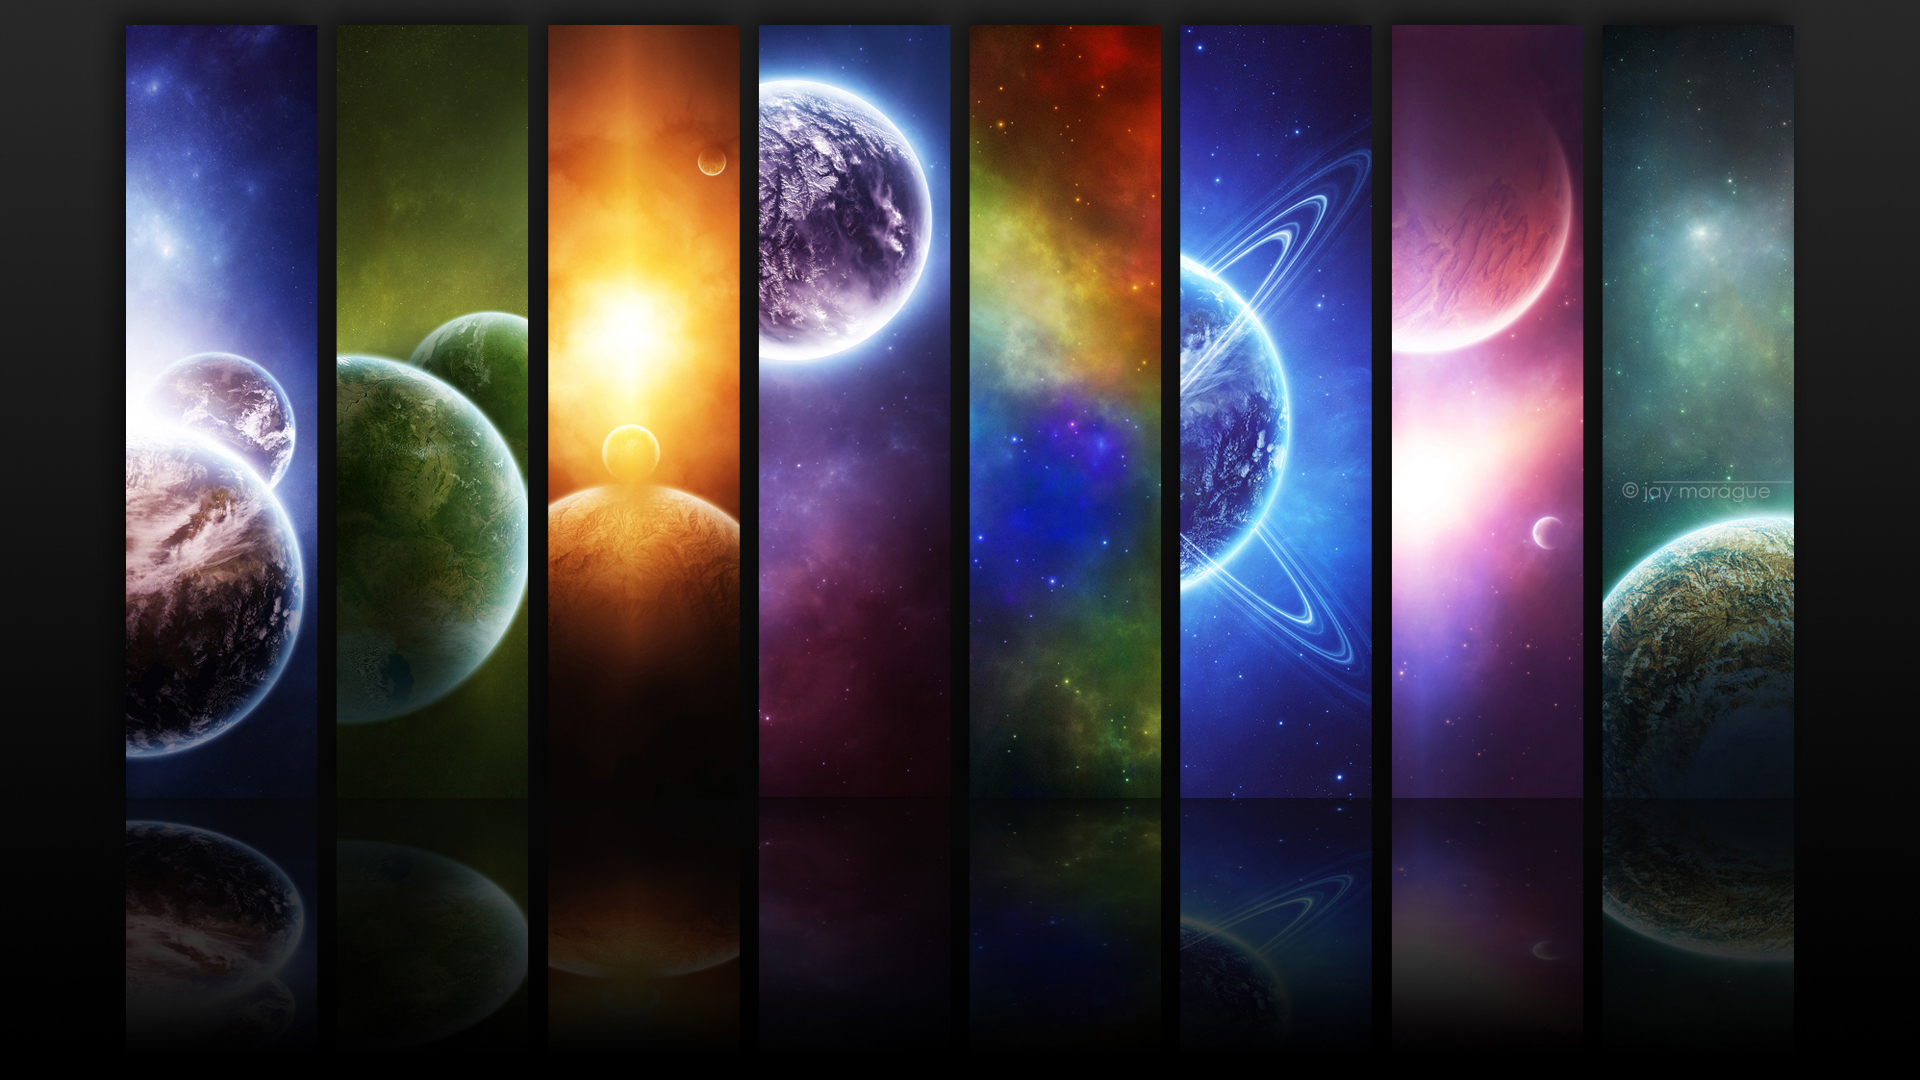 Infinity Hdtv 1080p Wallpapers Hd Wallpapers Id - Cool Pics Of The Solar System , HD Wallpaper & Backgrounds